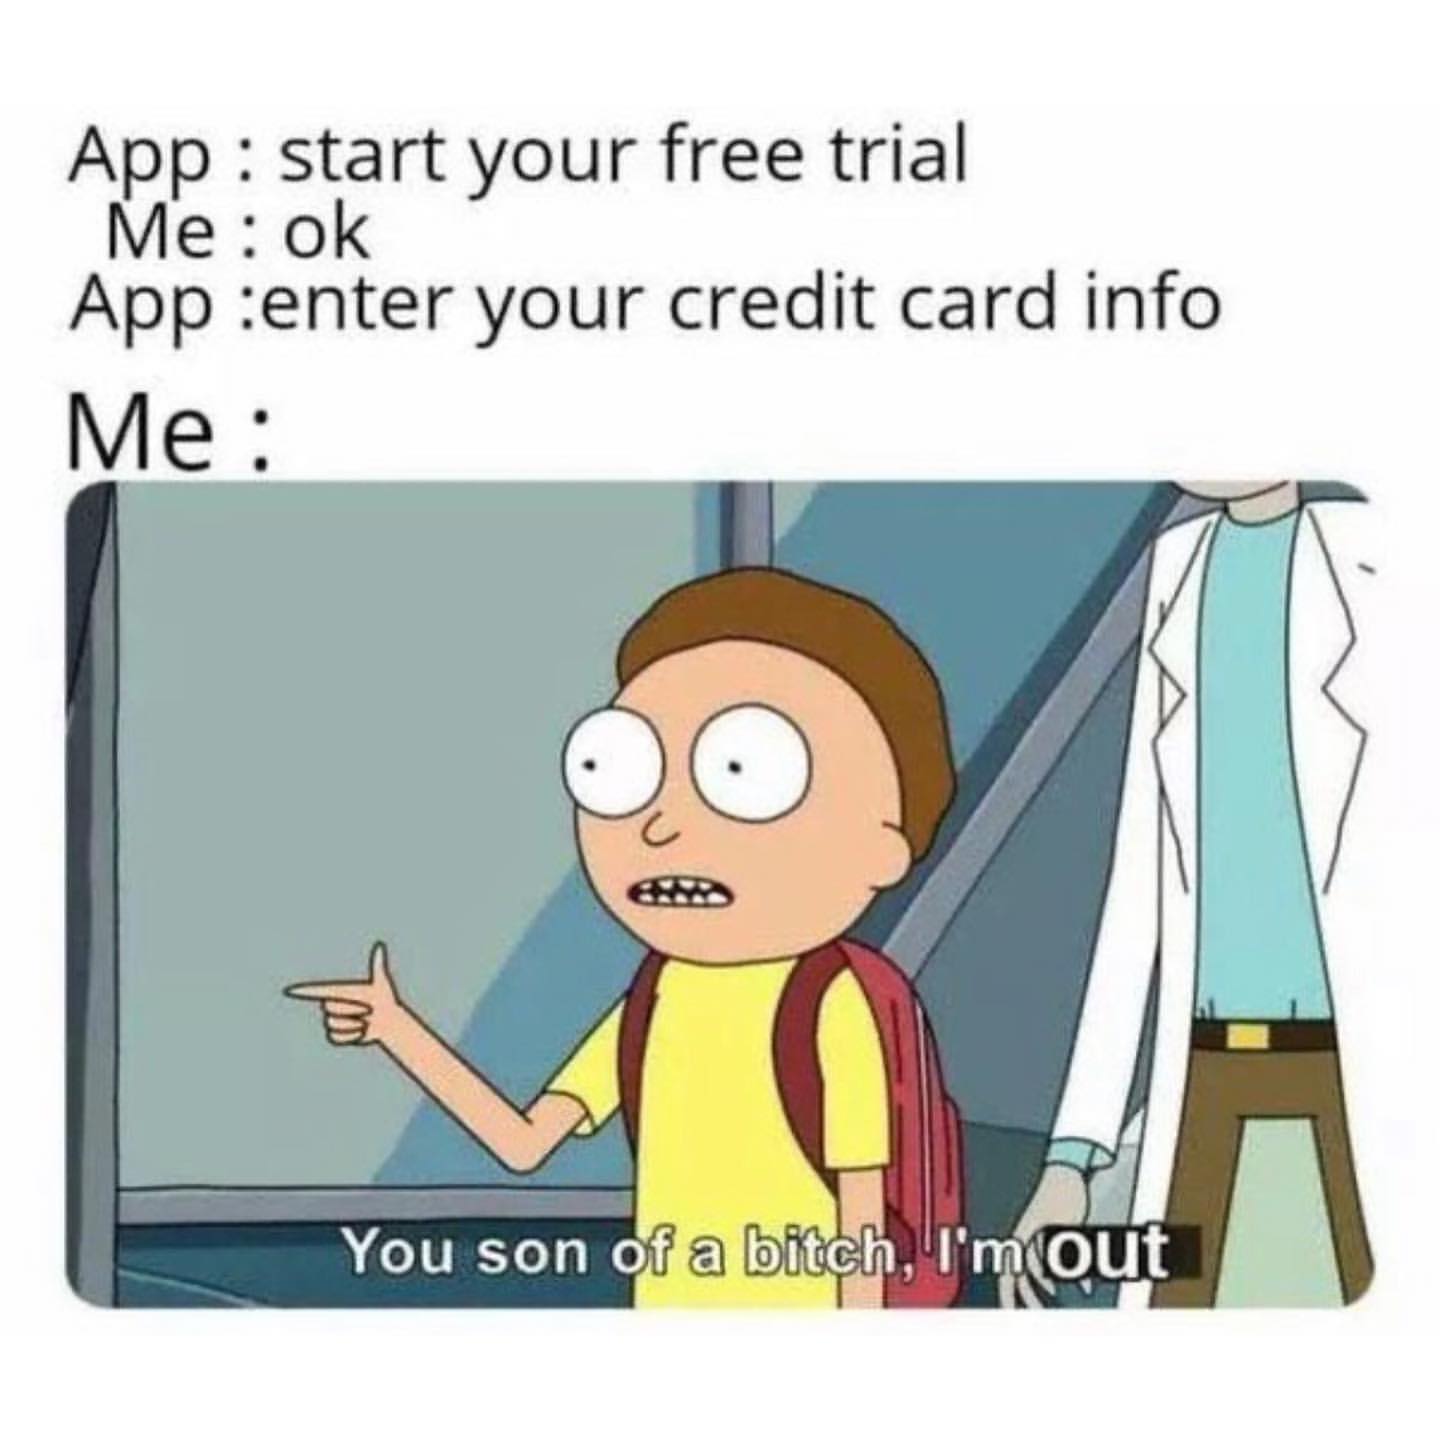 App: Start your free trial. Me: Ok. App: Enter your credit card info. Me: You son of a bitch, I'm out.